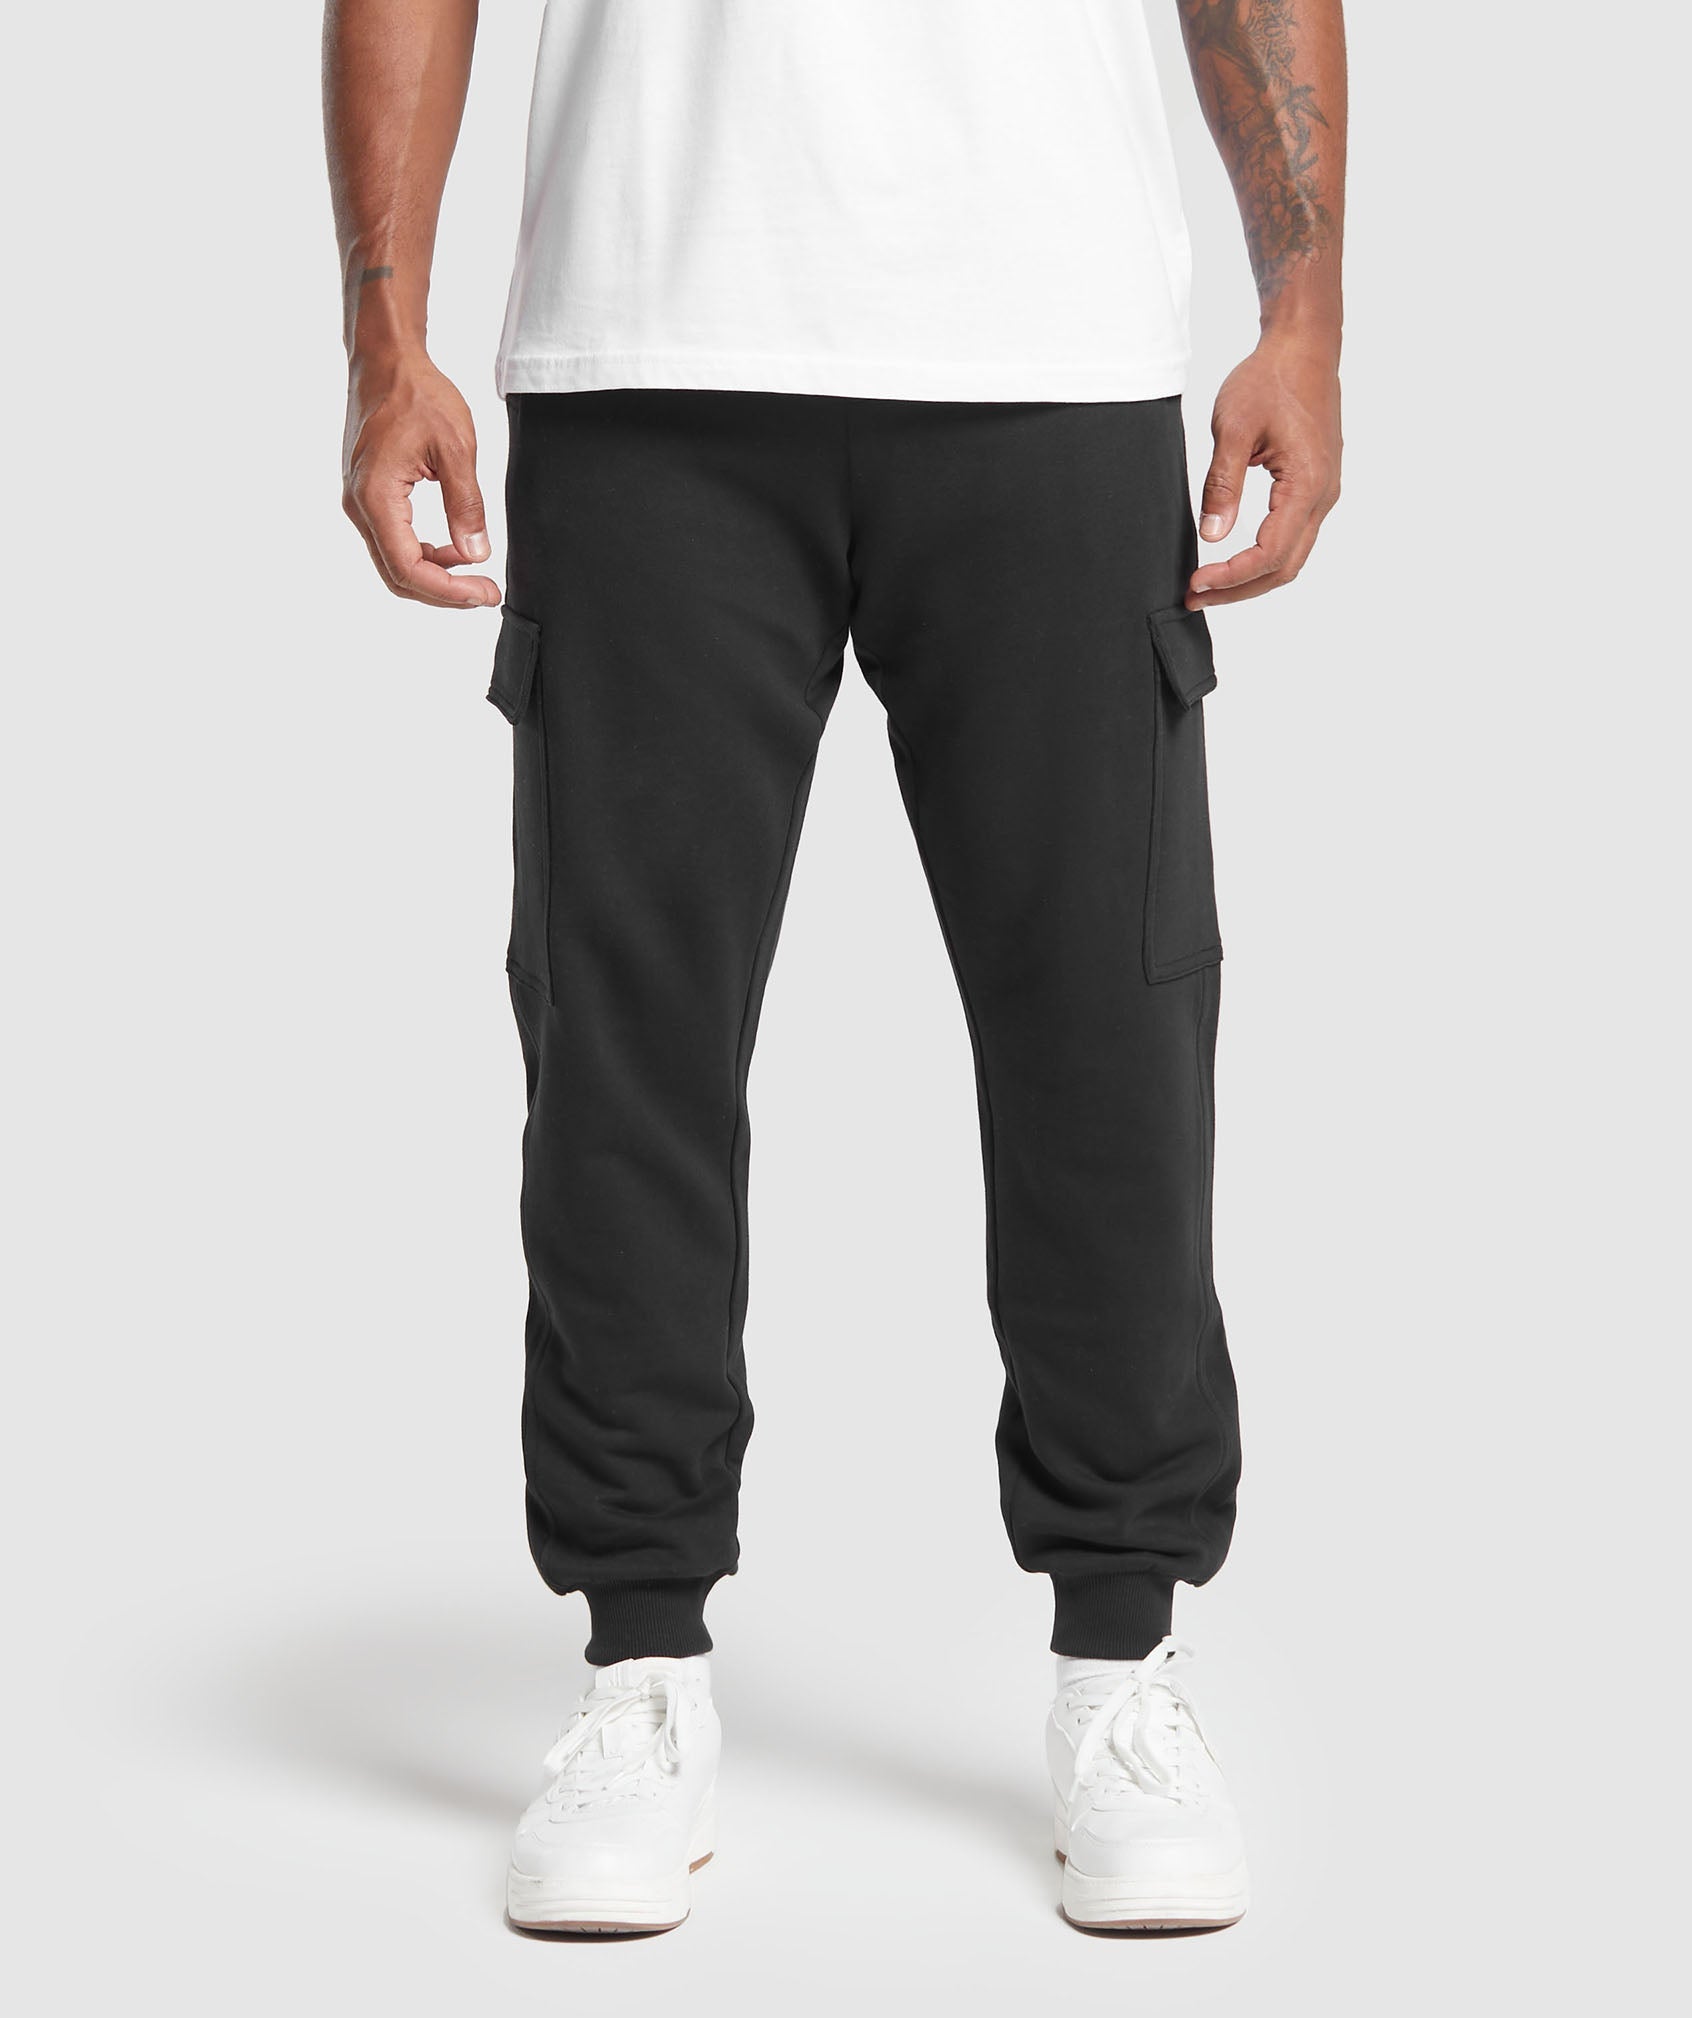 Rest Day Essentials Cargo Joggers